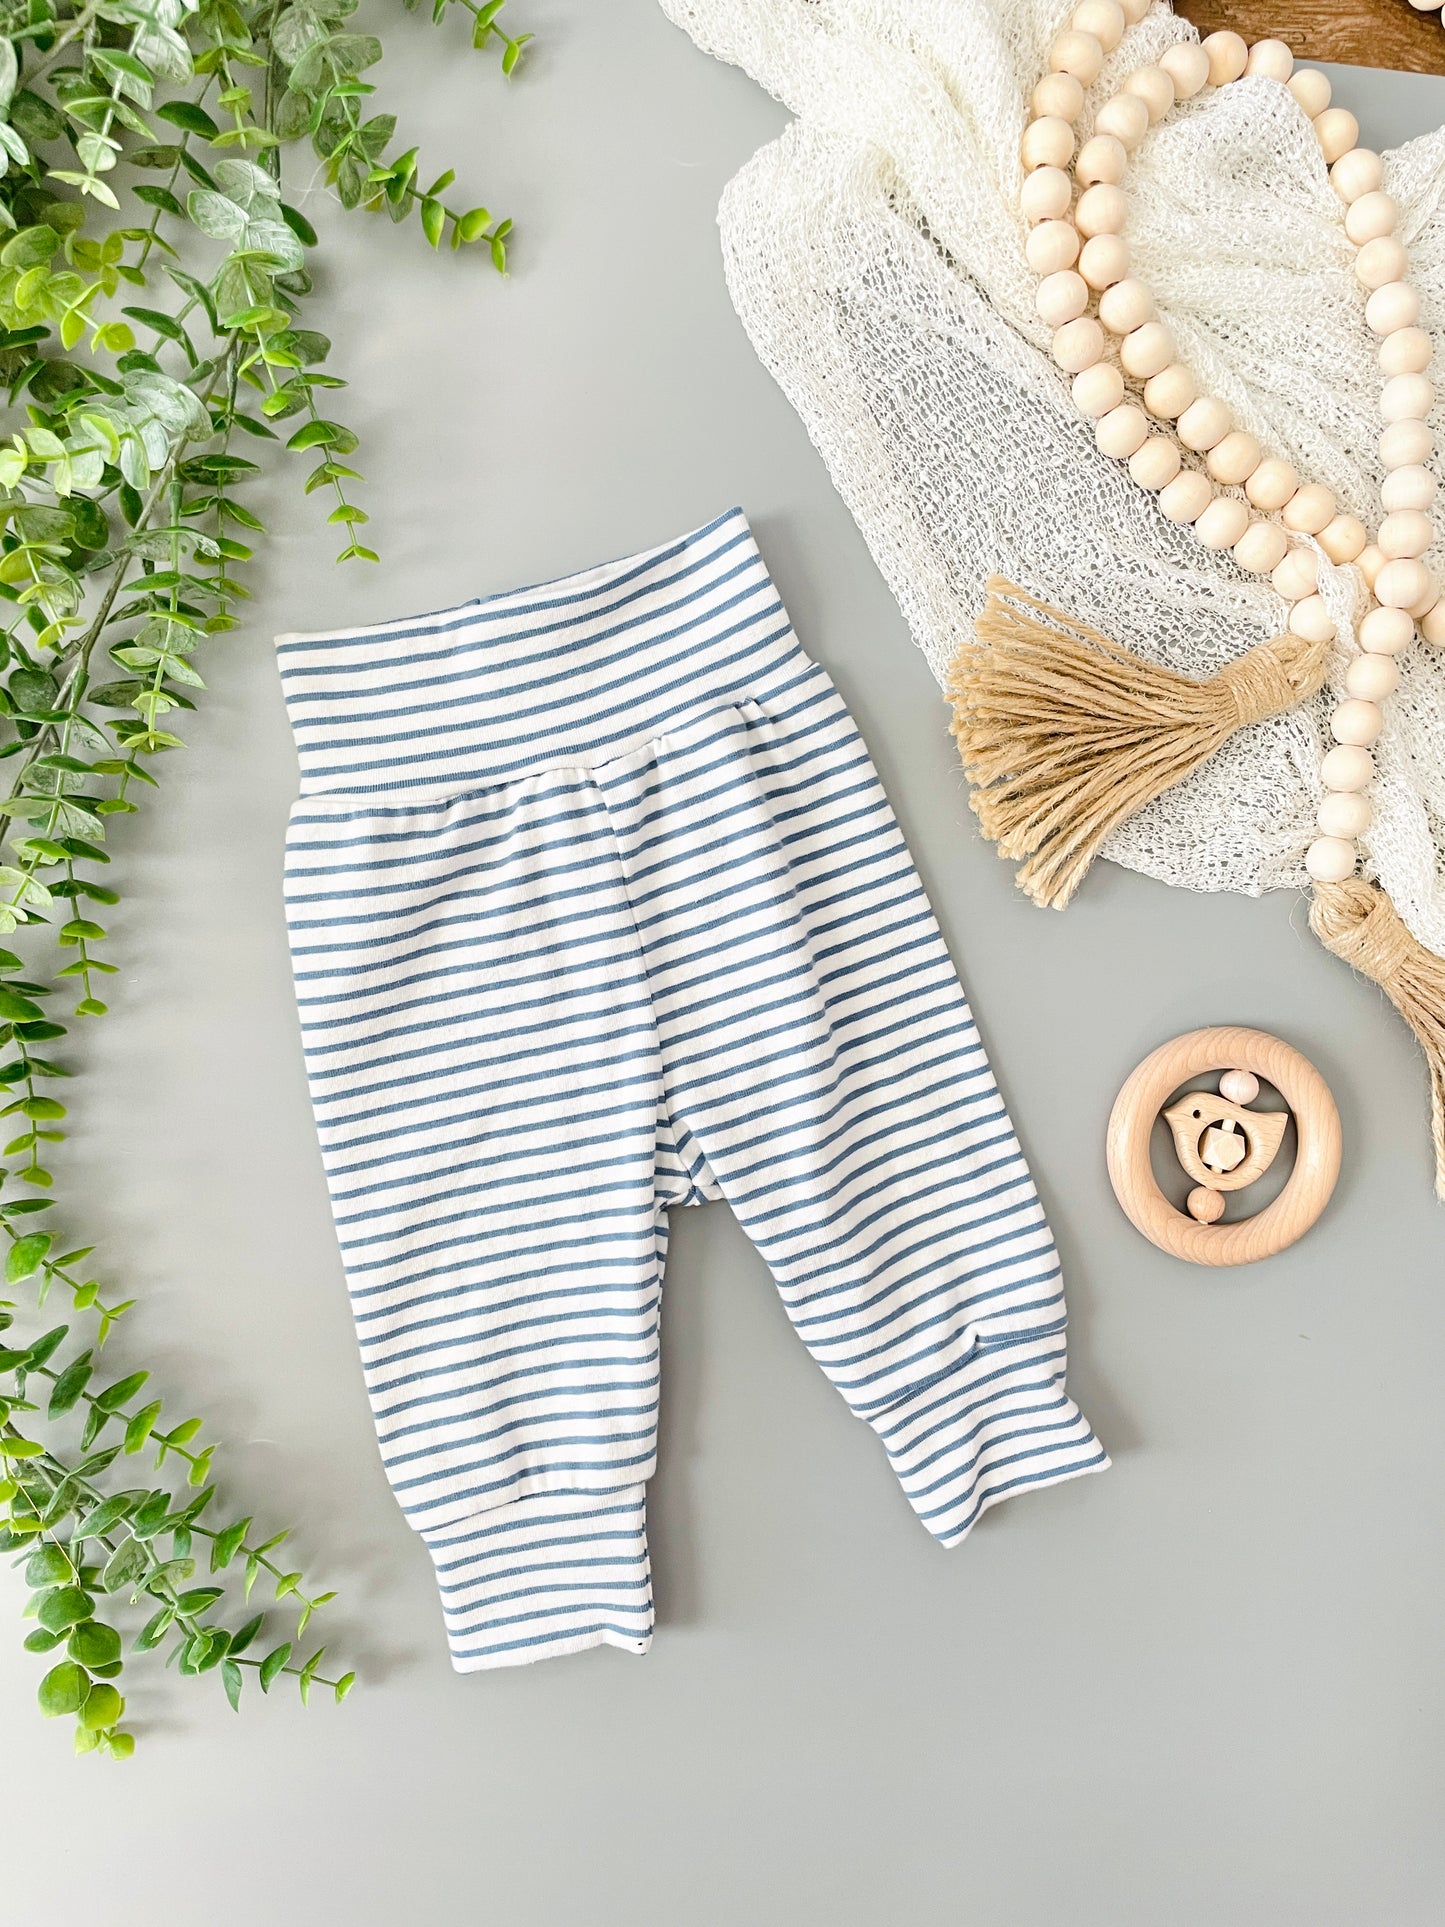 Blue and White Stripes Baby Pants or Set